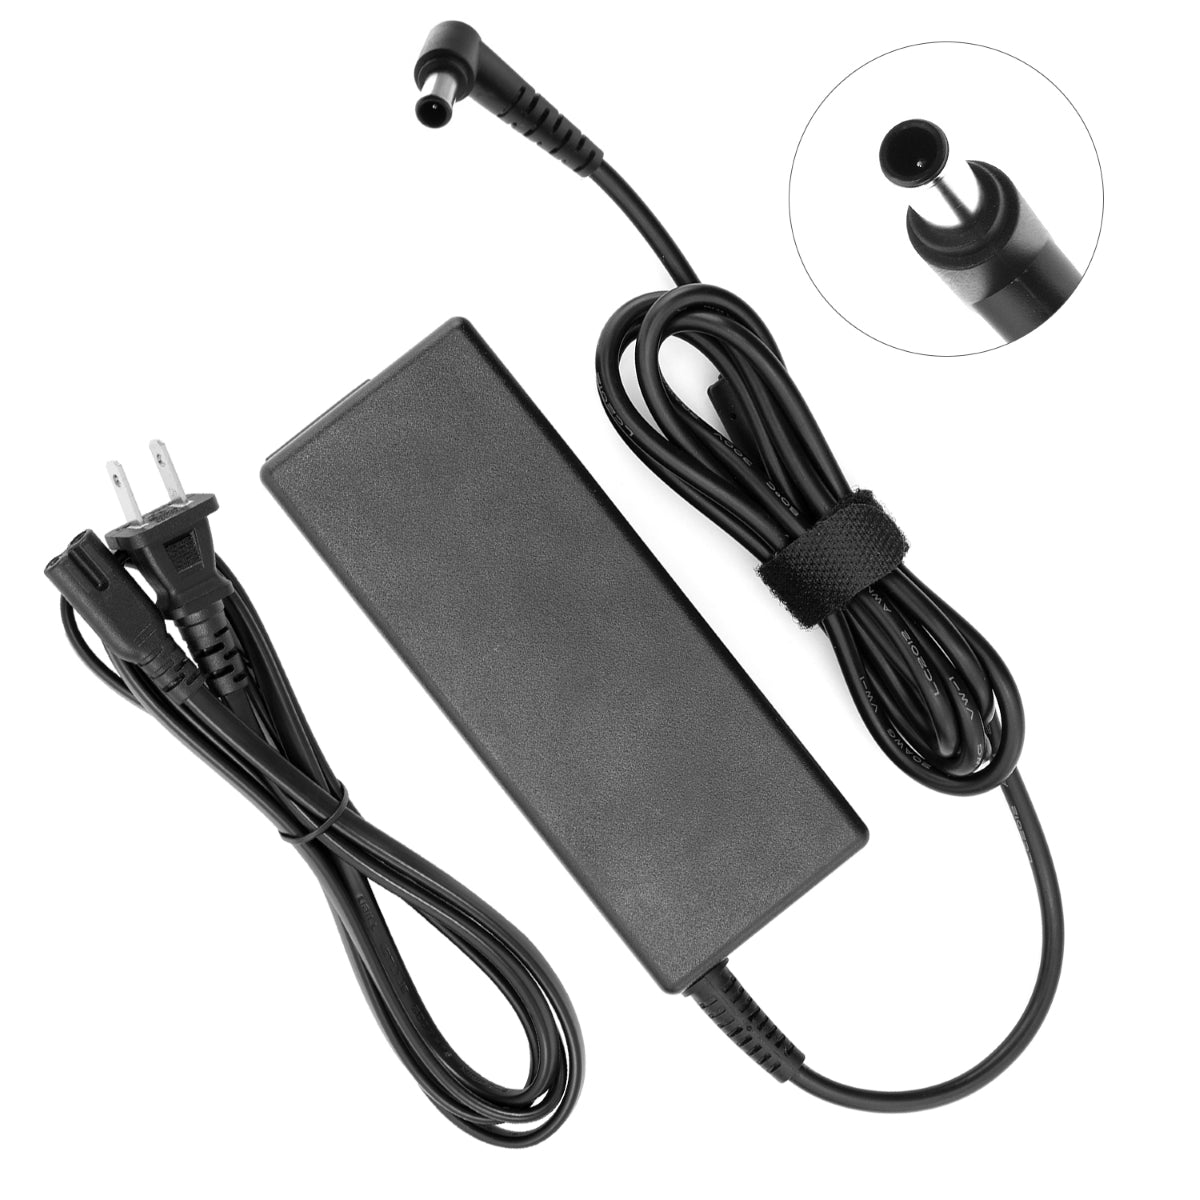 AC Adapter Power Supply for Samsung SyncMaster S24A300B Monitor